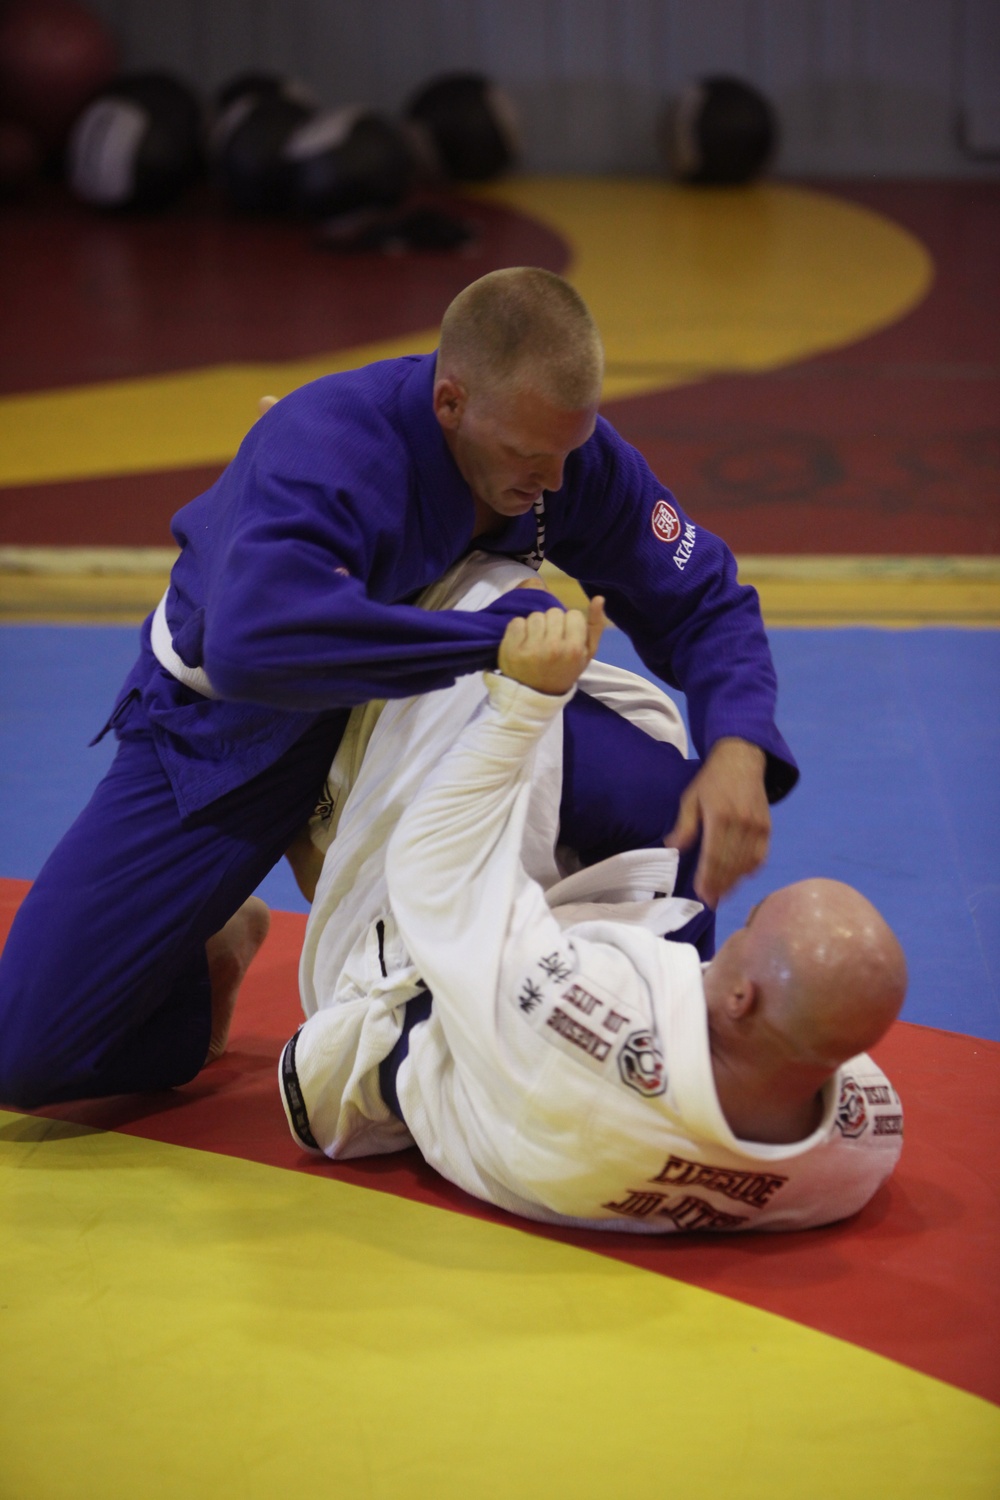 Marines tackle grappling tournament, earn medals